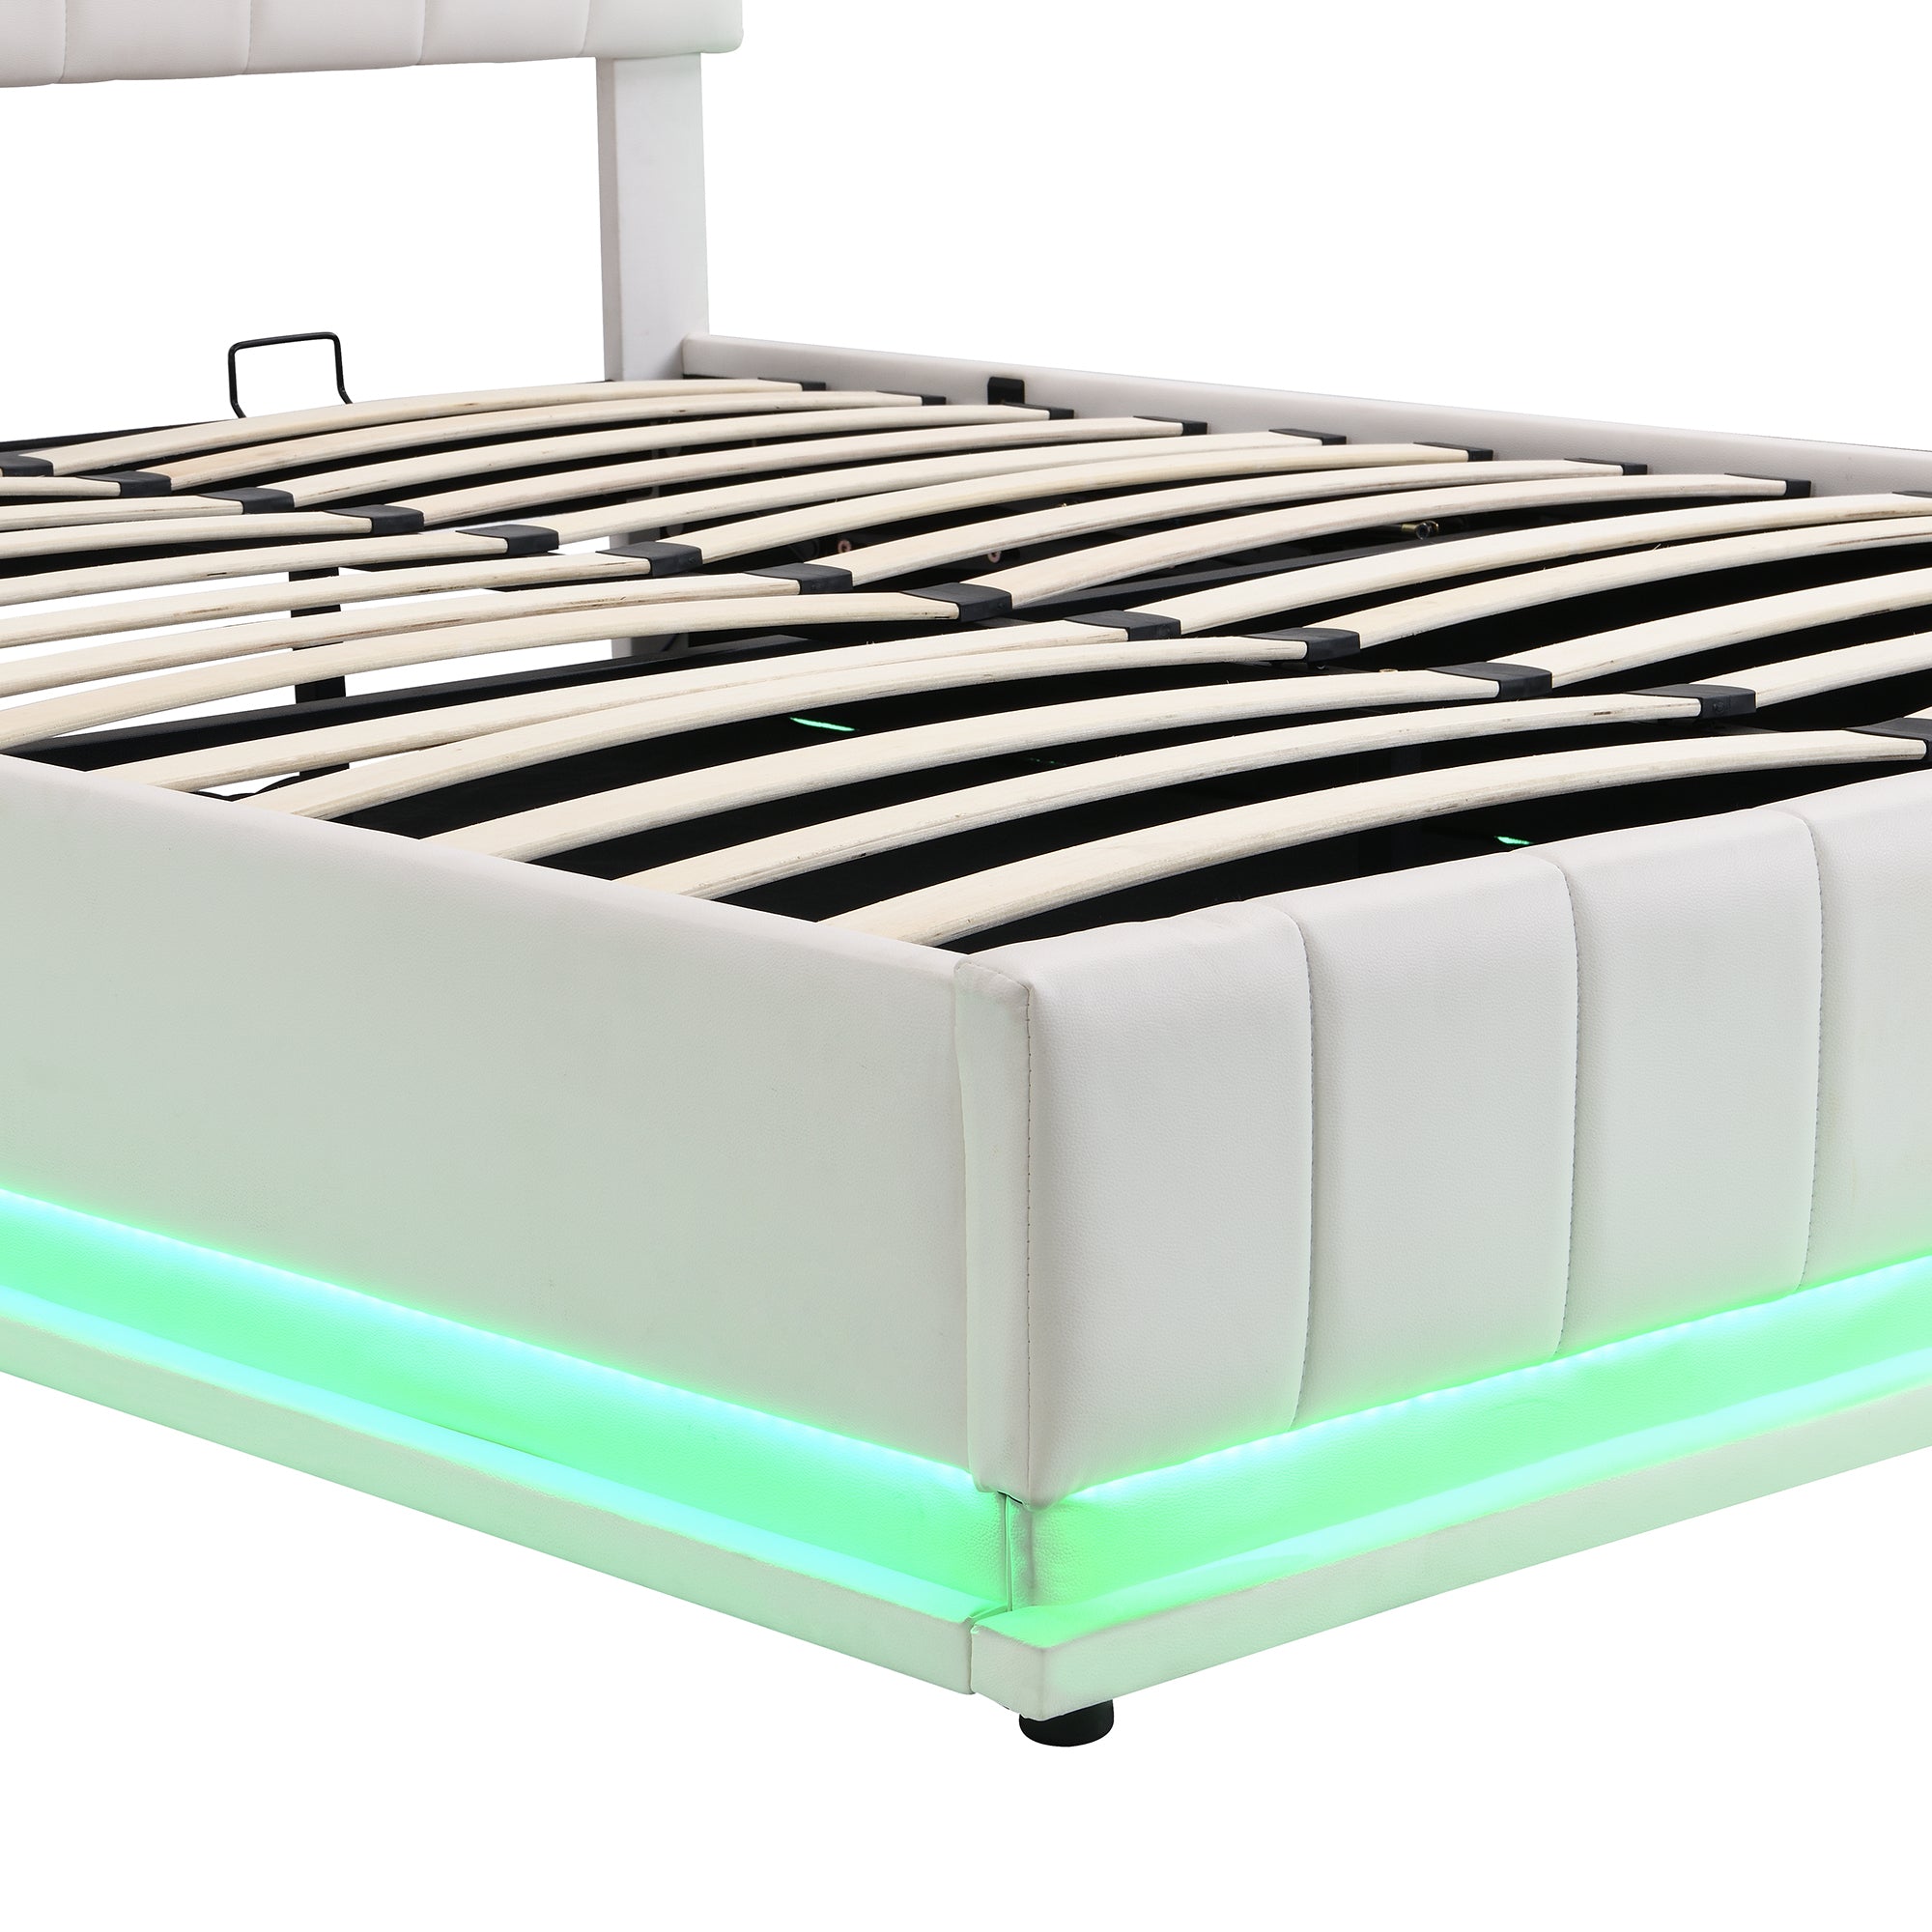 Queen Size Upholstered Bed with Hydraulic Storage System and LED Light, Modern Platform Bed with Sockets and USB Ports - White